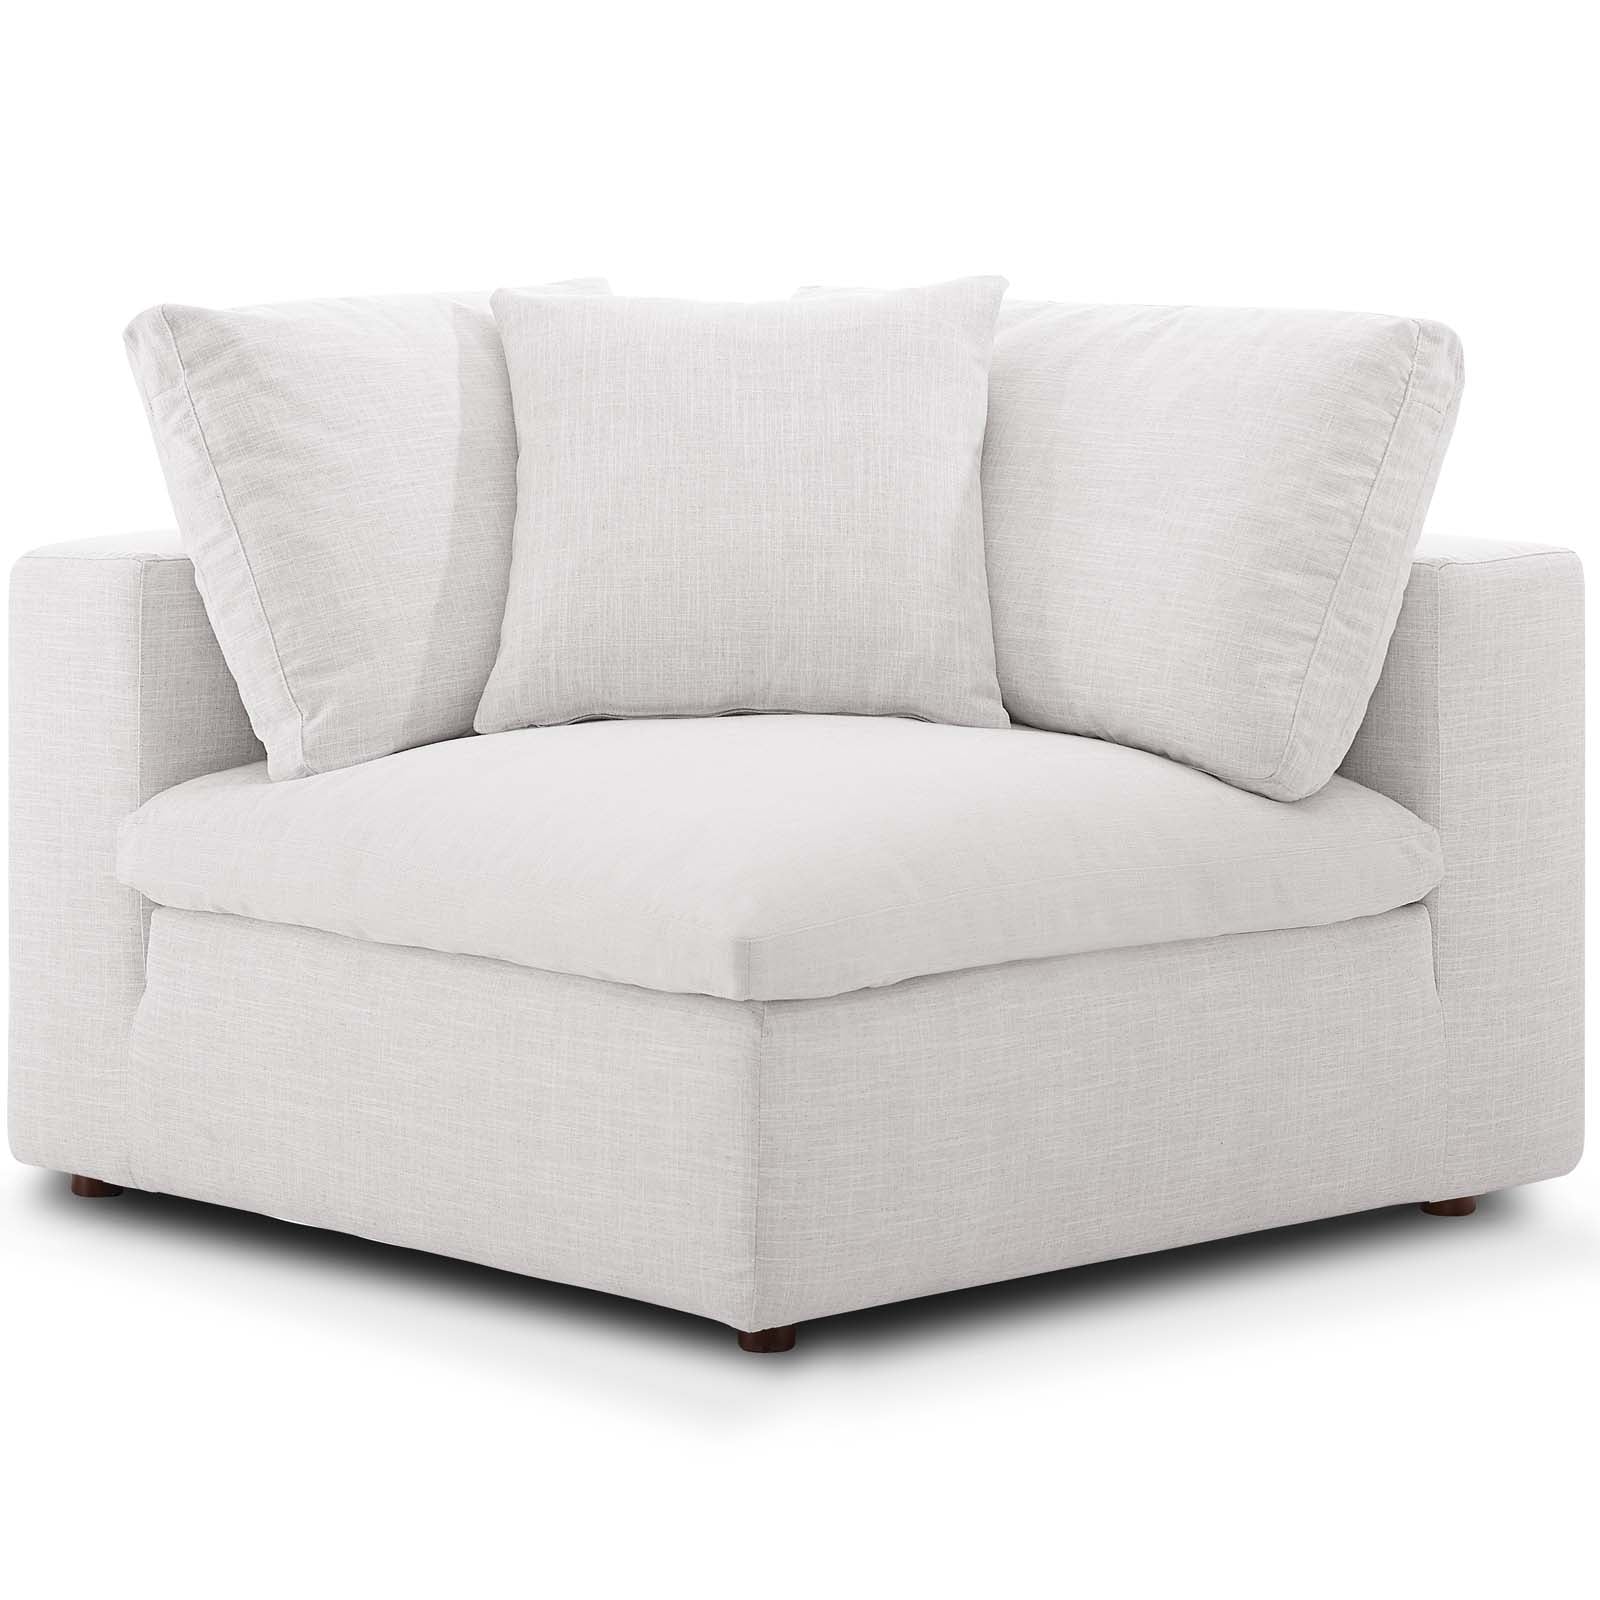 Commix Down Filled Overstuffed 2 Piece Sectional Sofa Set - East Shore Modern Home Furnishings